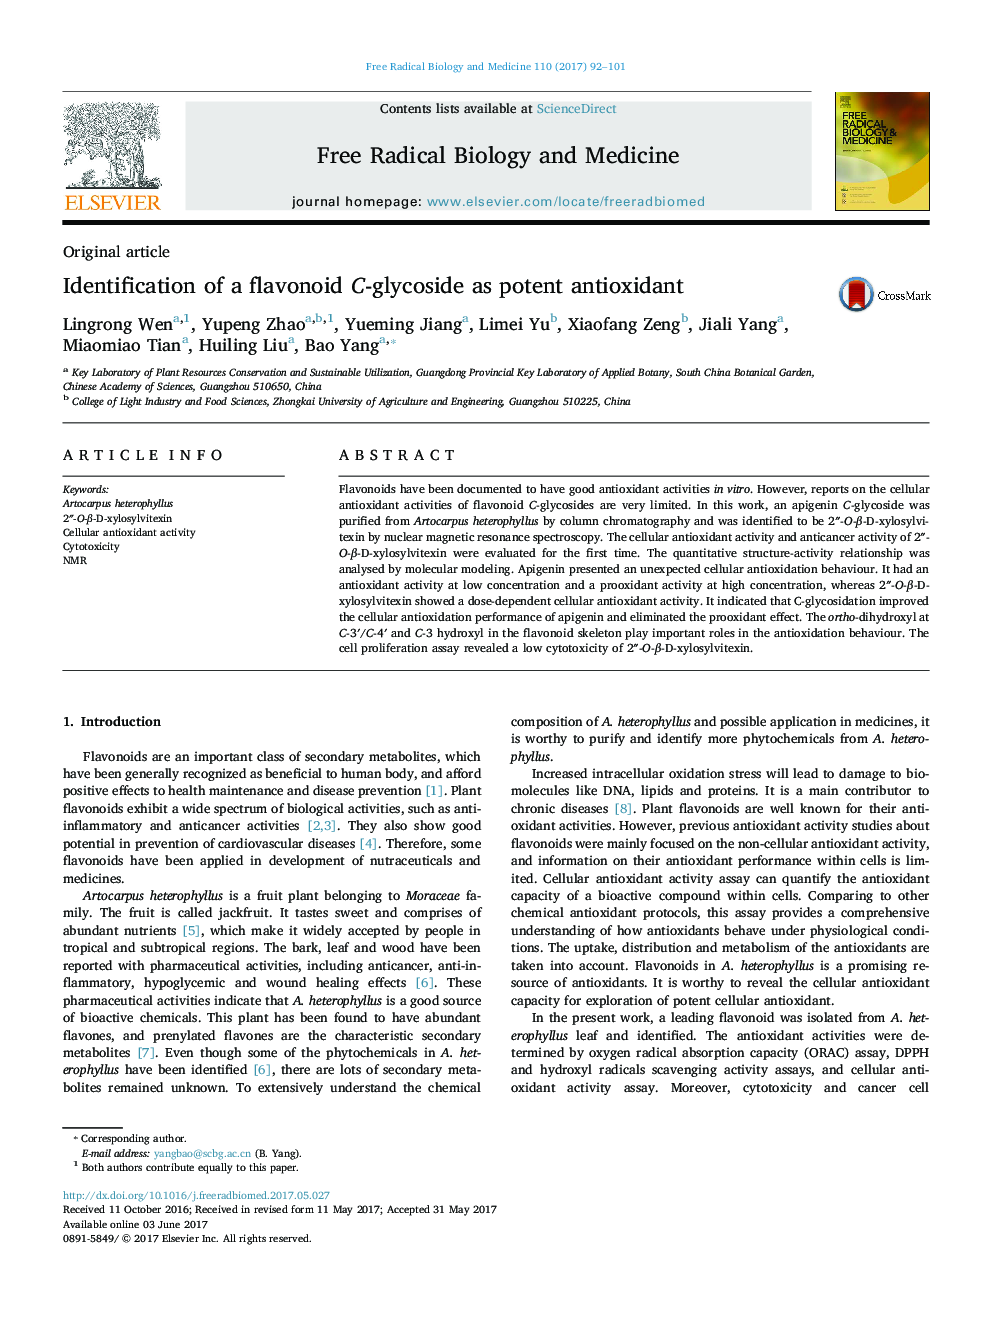 Identification of a flavonoid C-glycoside as potent antioxidant